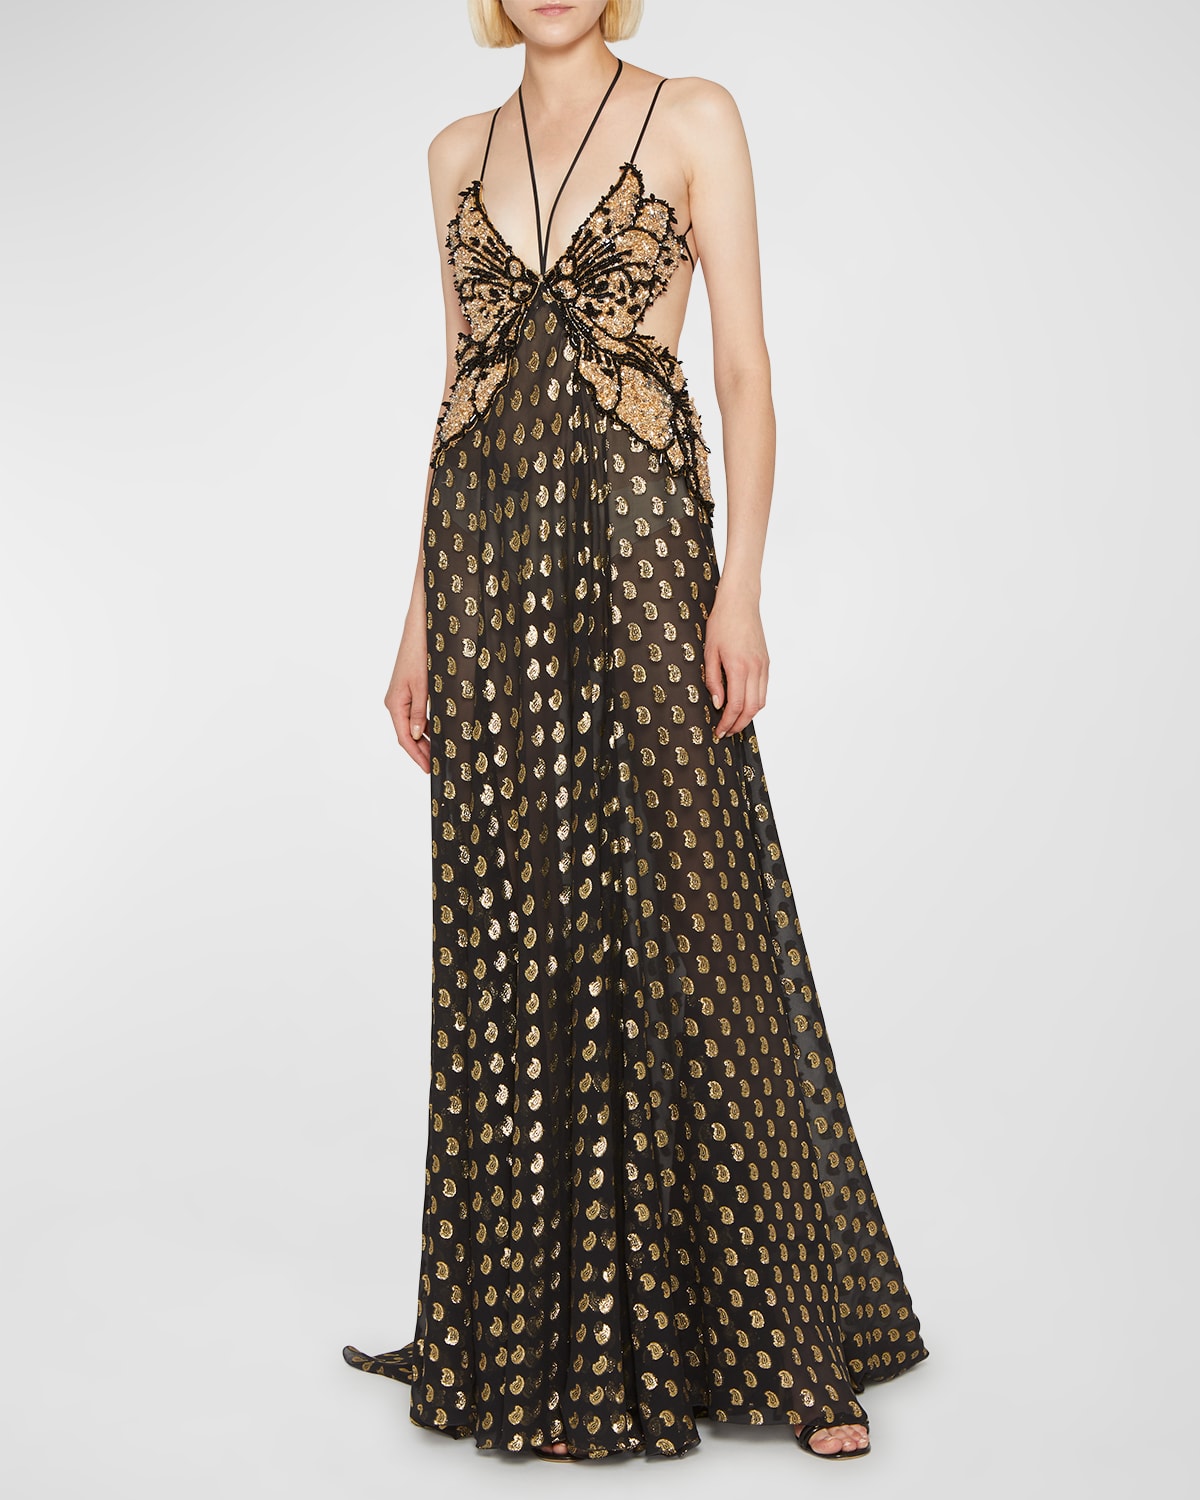 ETRO CRYSTAL BUTTERFLY BODICE PAISLEY FIL COUPE GOWN